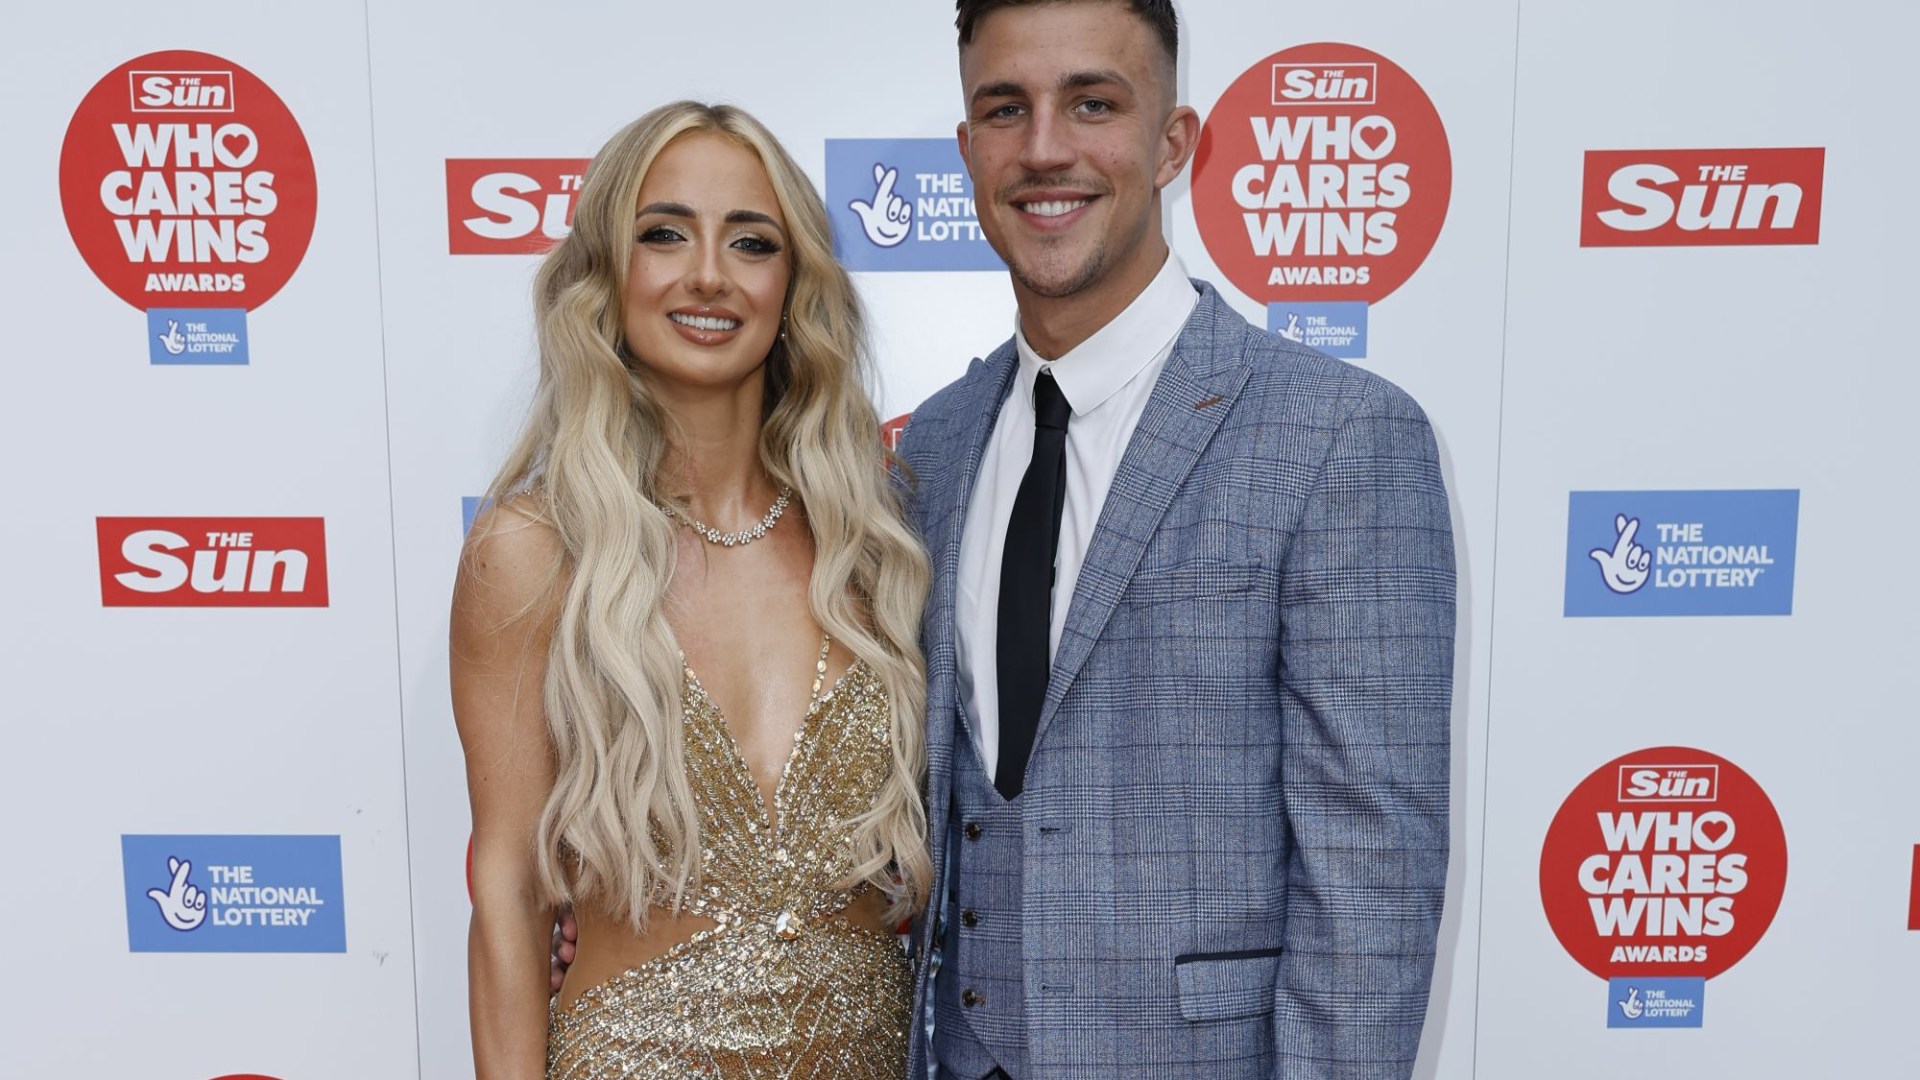 Love Island’s Mitch and ex Abi spark romance rumous at The Sun Who Cares Wins awards with cosy red carpet appearance